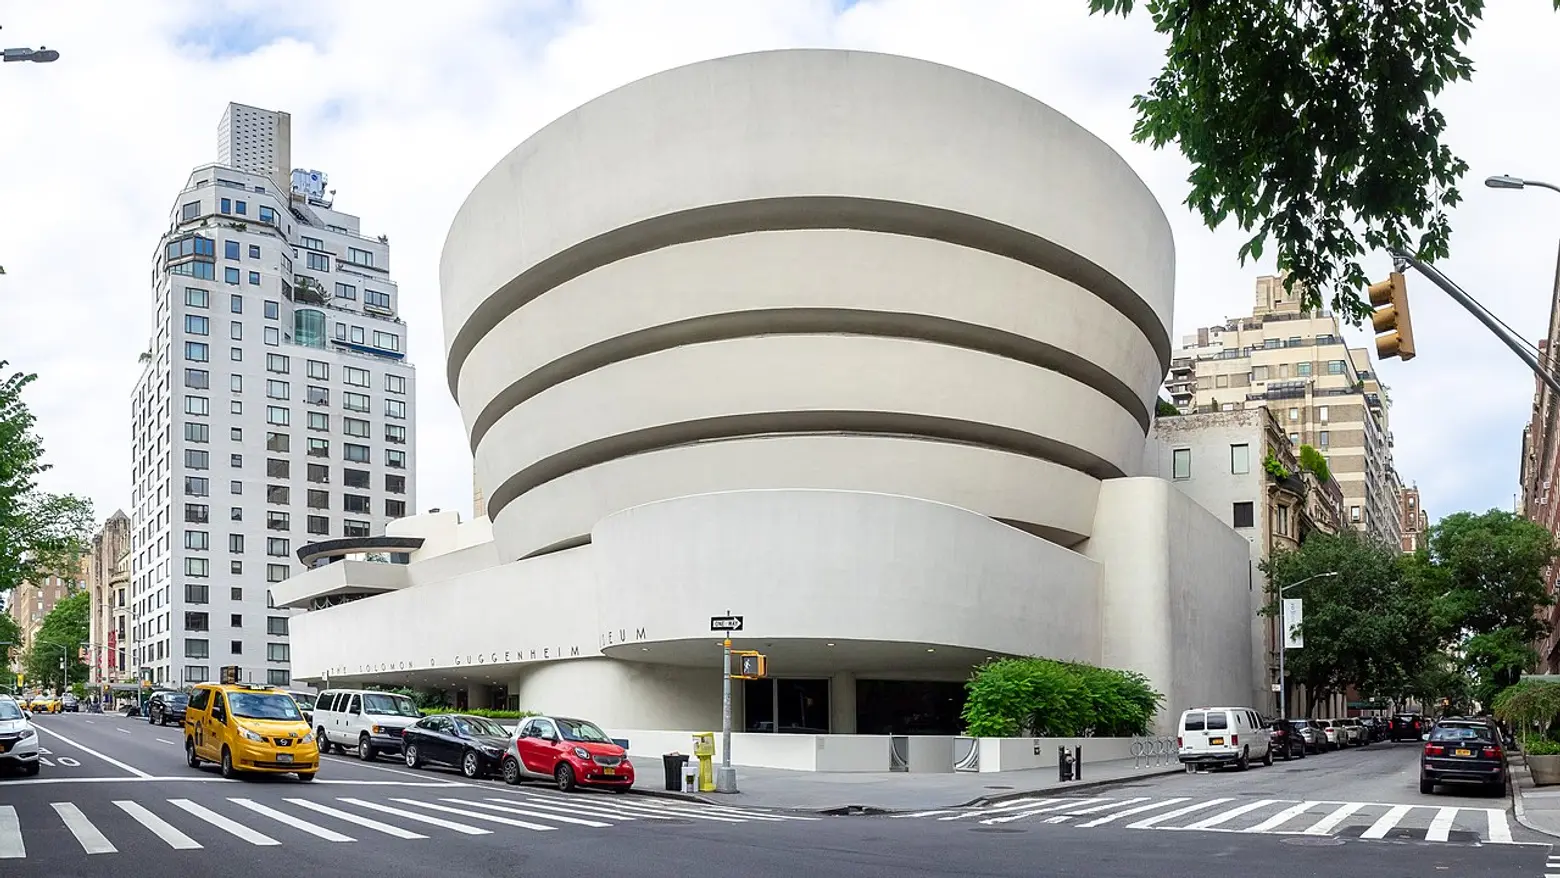 Frank Lloyd Wright’s Guggenheim becomes a UNESCO World Heritage site